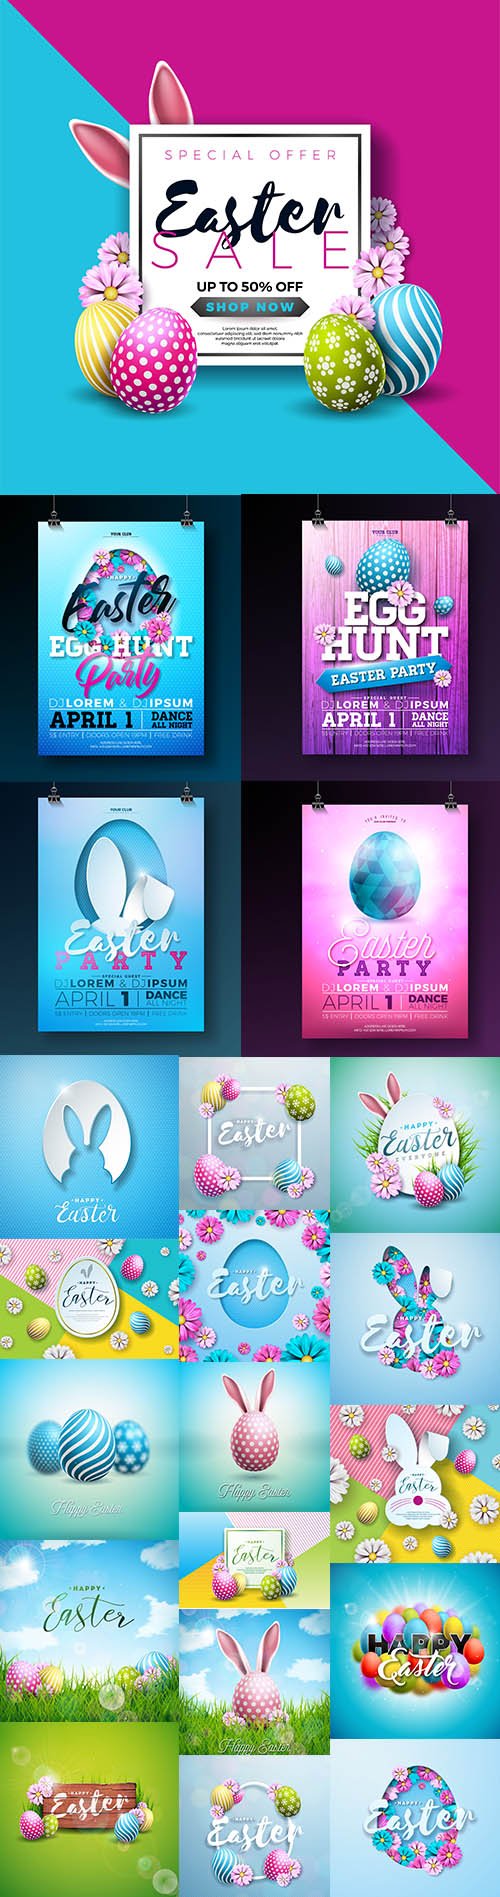 Happy Easter Holiday Premium Illustrations and Flyer Set